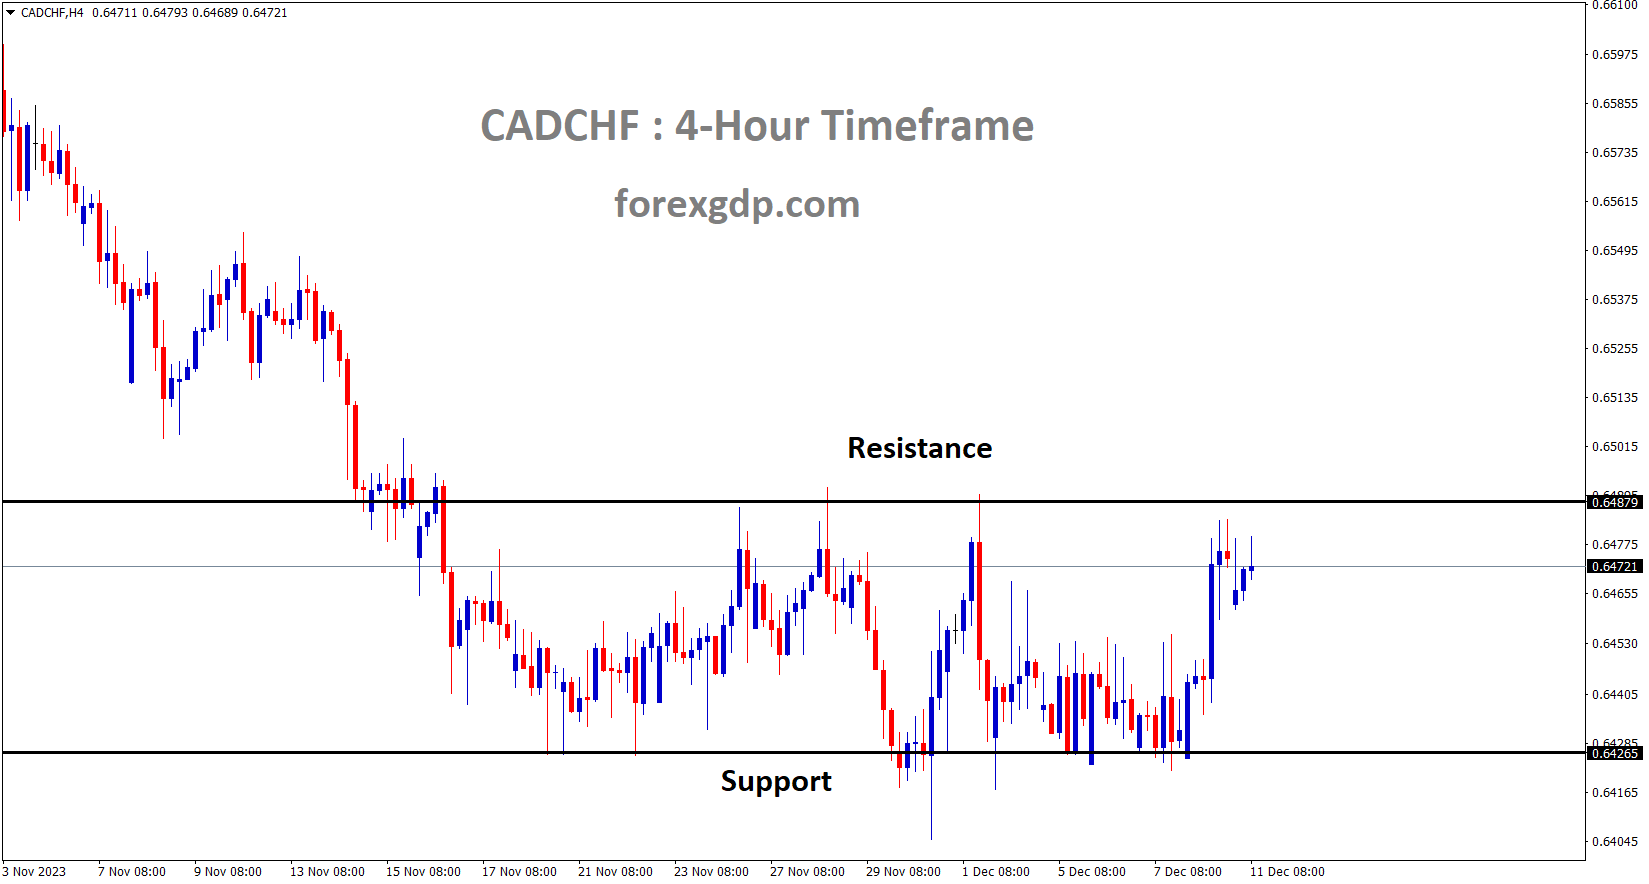 CADCHF is moving in a box pattern and the market has reached the Resistance area of the pattern